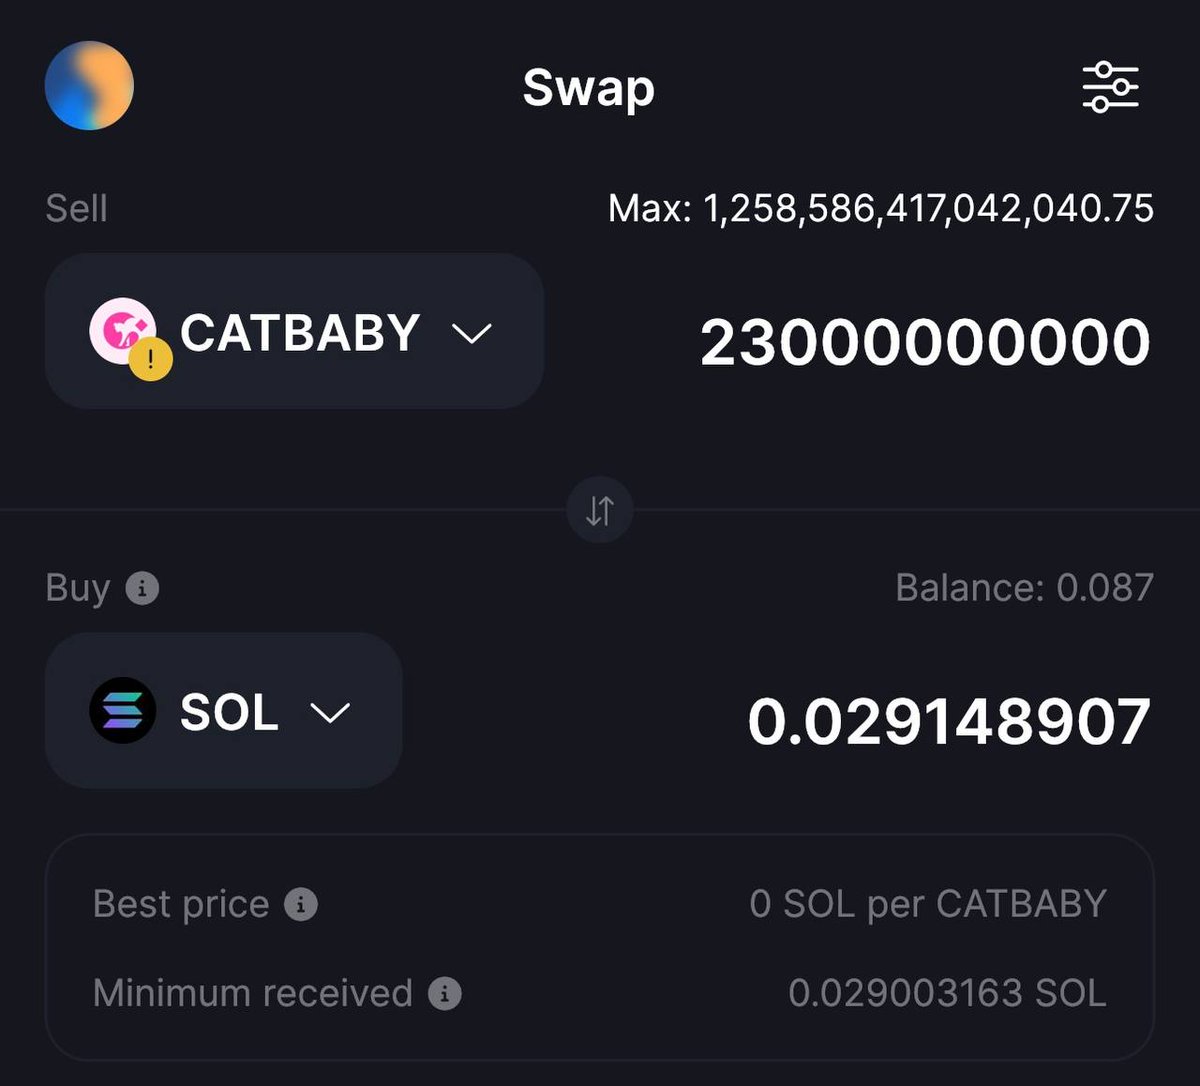 💥GOOD LUCKY 888  PEOPLE 💥
🌕 : Reward $CATBABY for bull run
 You’ll receive  5000000000000 $catbaby (24.79 SOL) 
💥 : 4 PROVISO  👇
🌕 :  Follow 
🌕 :  Retweet 
🌕 : Tag 3 profile🐱
🌕 : In your wallet must have as much as 23,000,000,000 (CATBABY ) Receive Raward
🌕 : Drop your